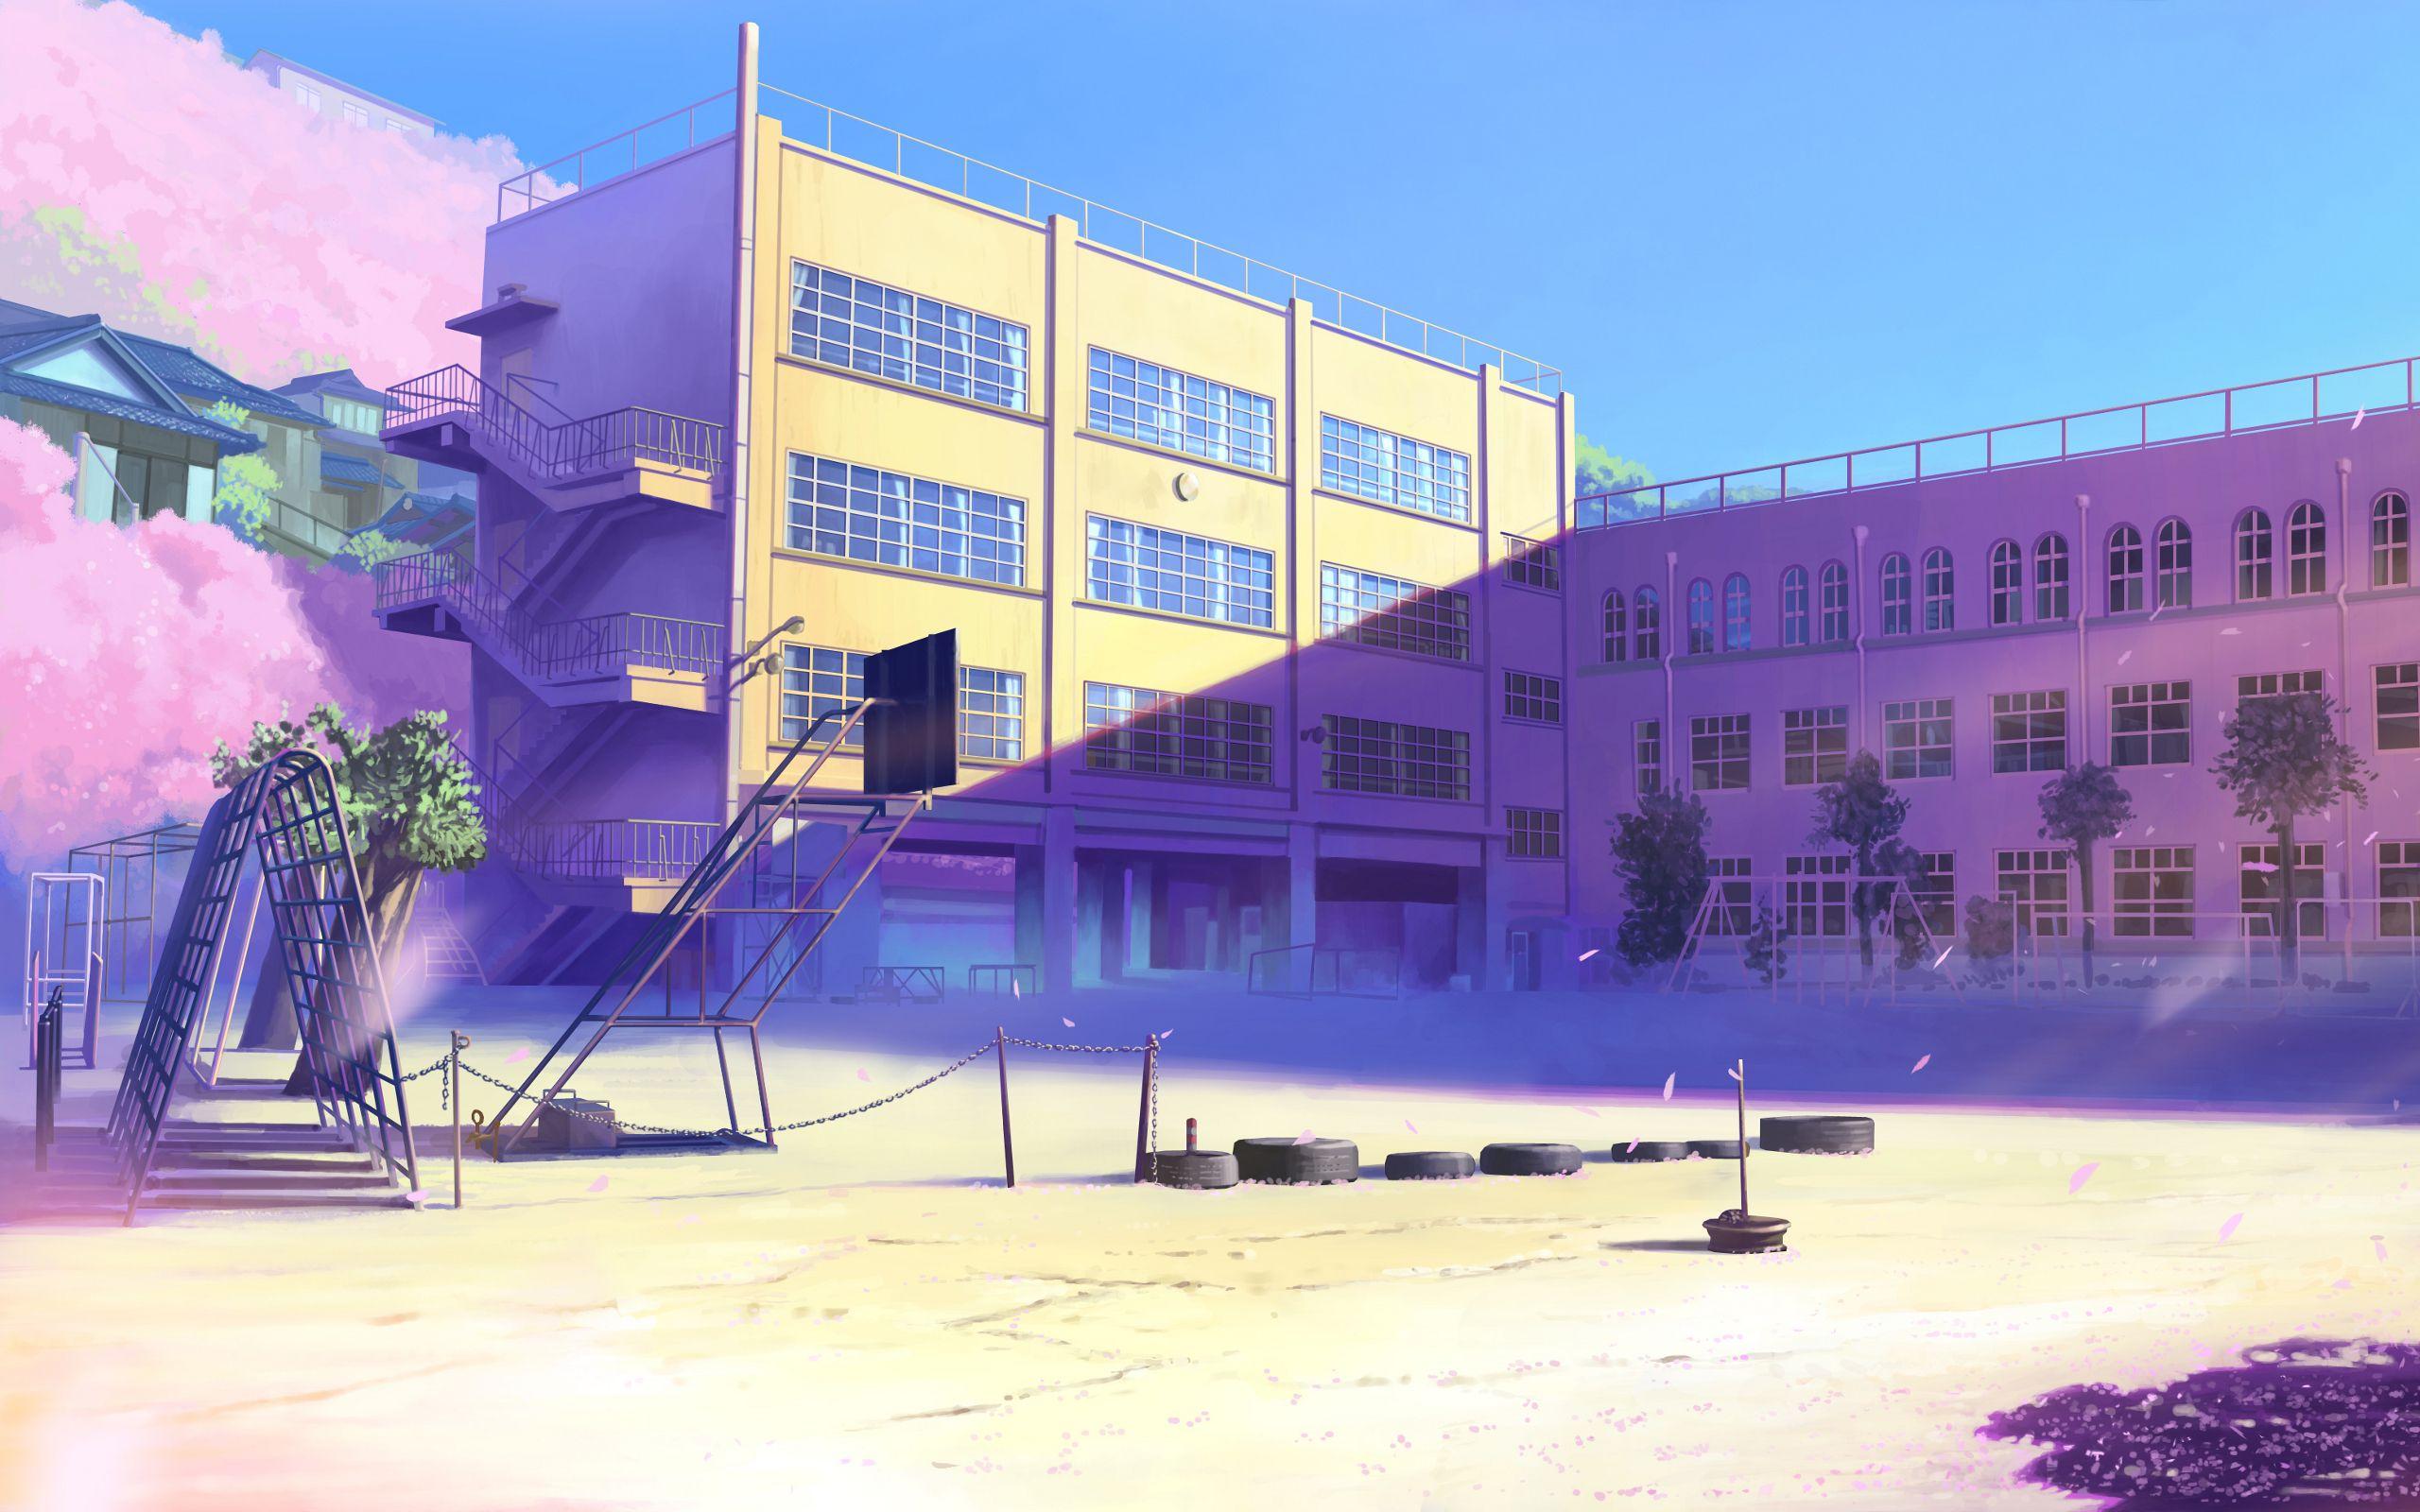 School yard image. Cool landscapes, Anime scenery